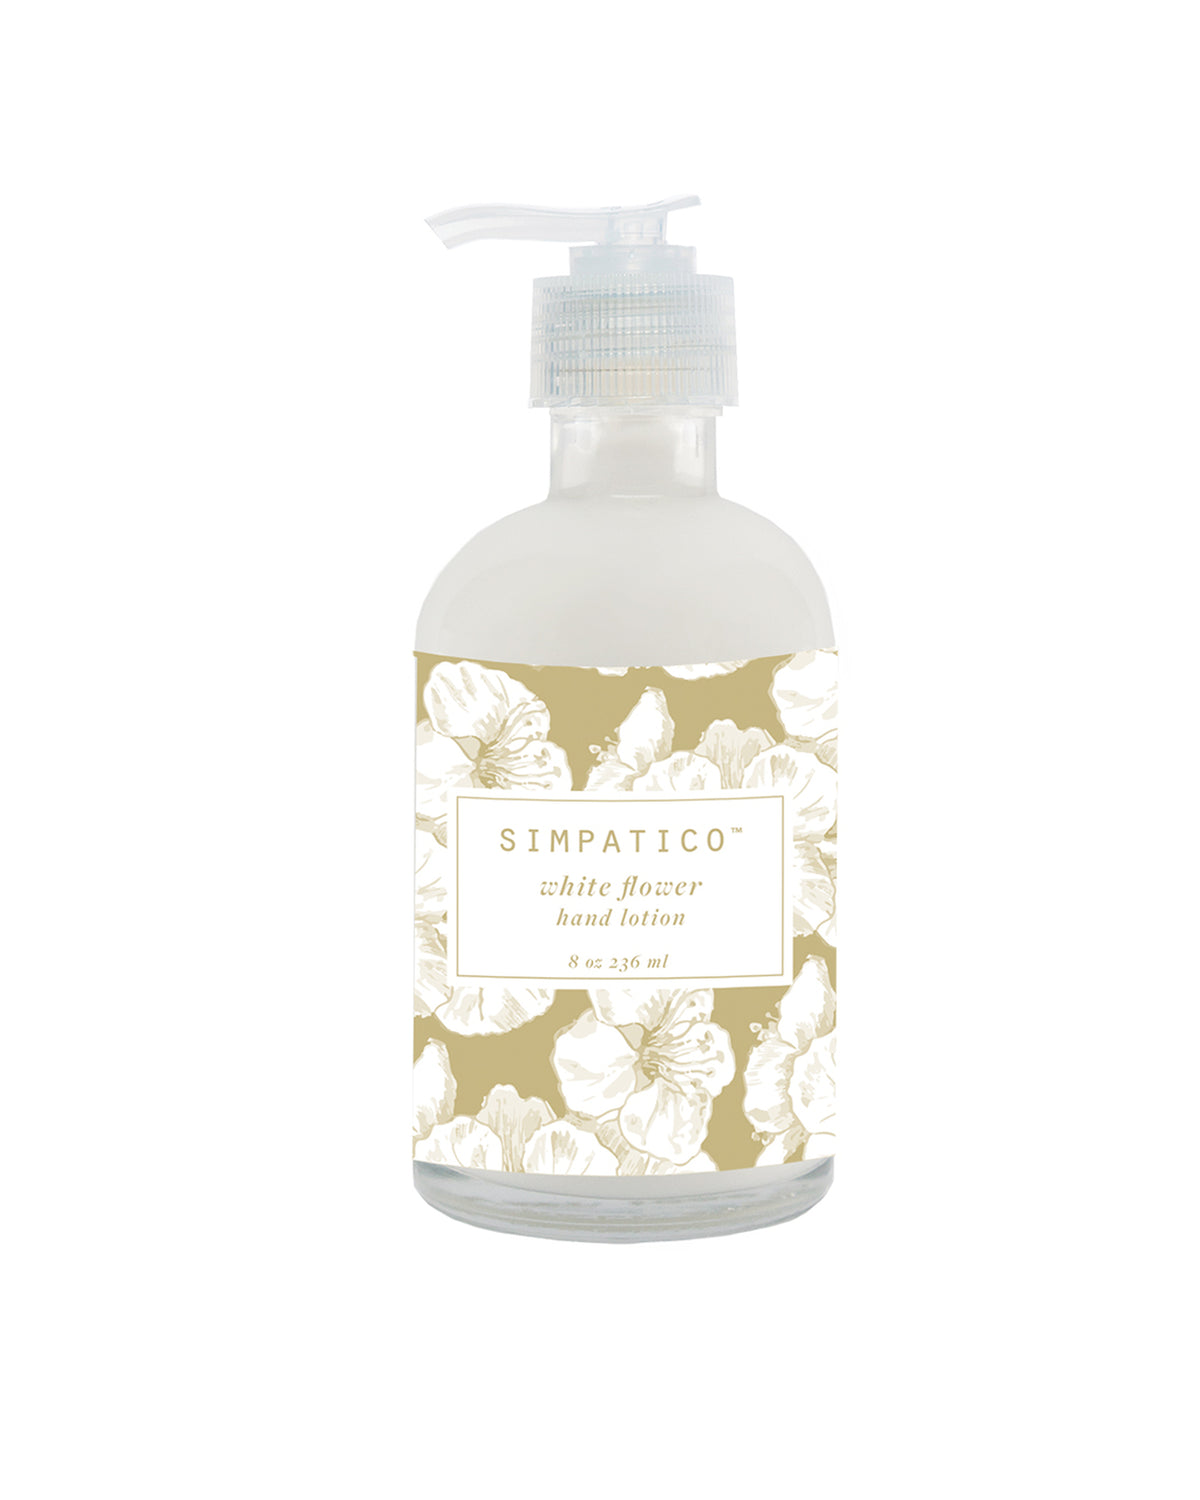 A clear bottle of Simpatico No. 42 White Flower Lotion with a pump dispenser, labeled with elegant floral designs in muted tones. It contains 8 oz (236 ml) of lotion formulated with natural ingredients.